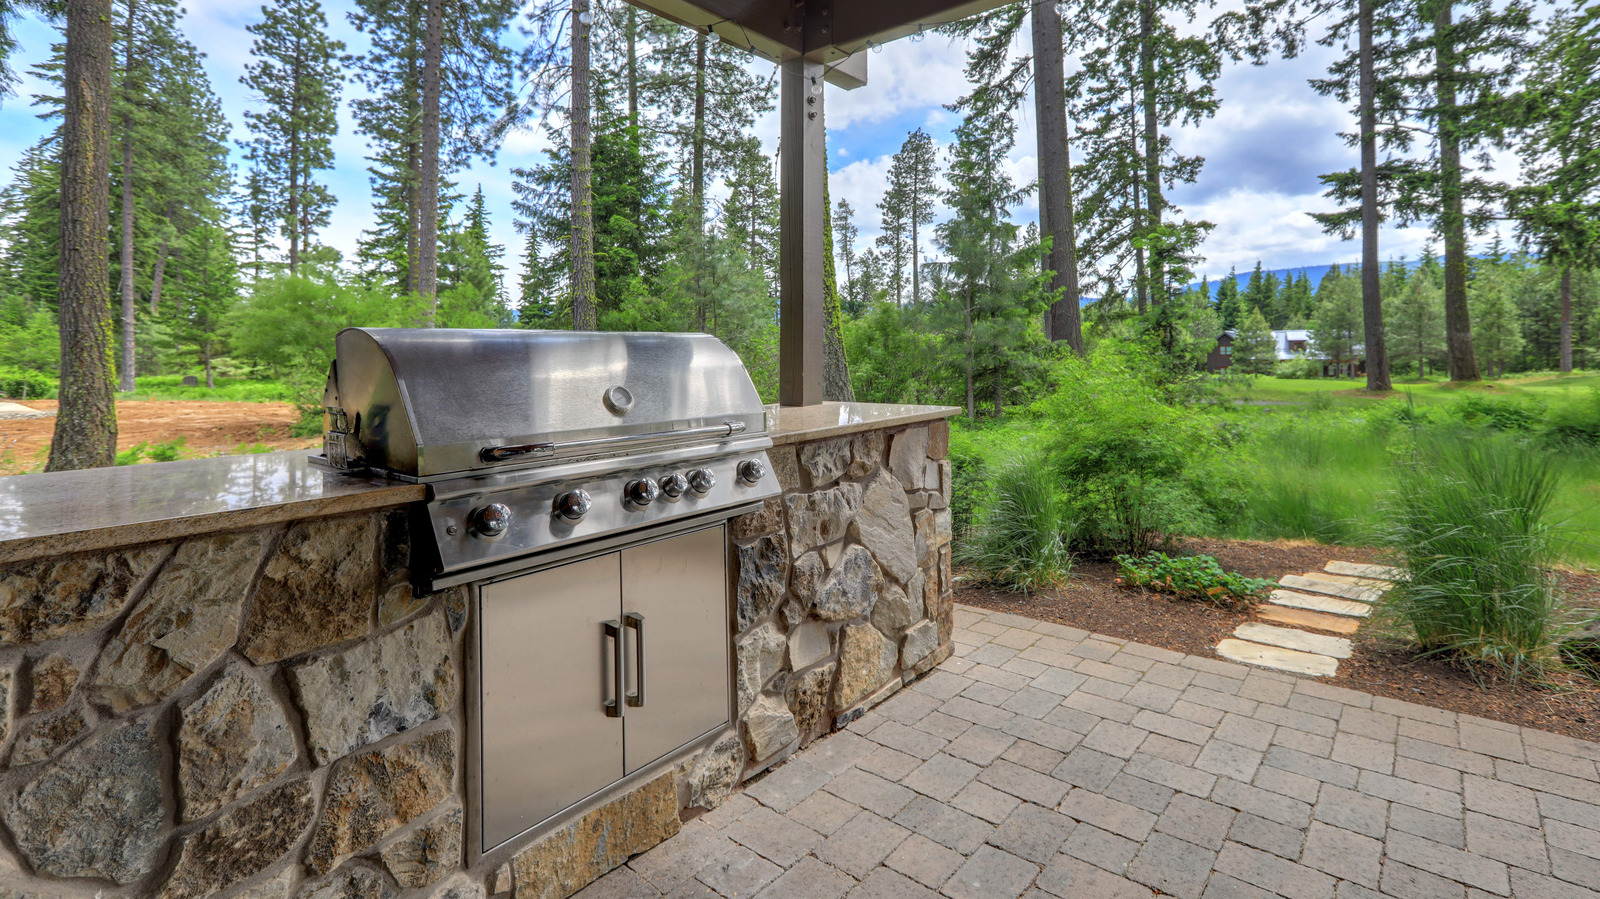 https://www.housedigest.com/img/gallery/a-home-depot-trend-expert-shares-the-hottest-summer-outdoor-cooking-trends/l-intro-1683908569.jpg